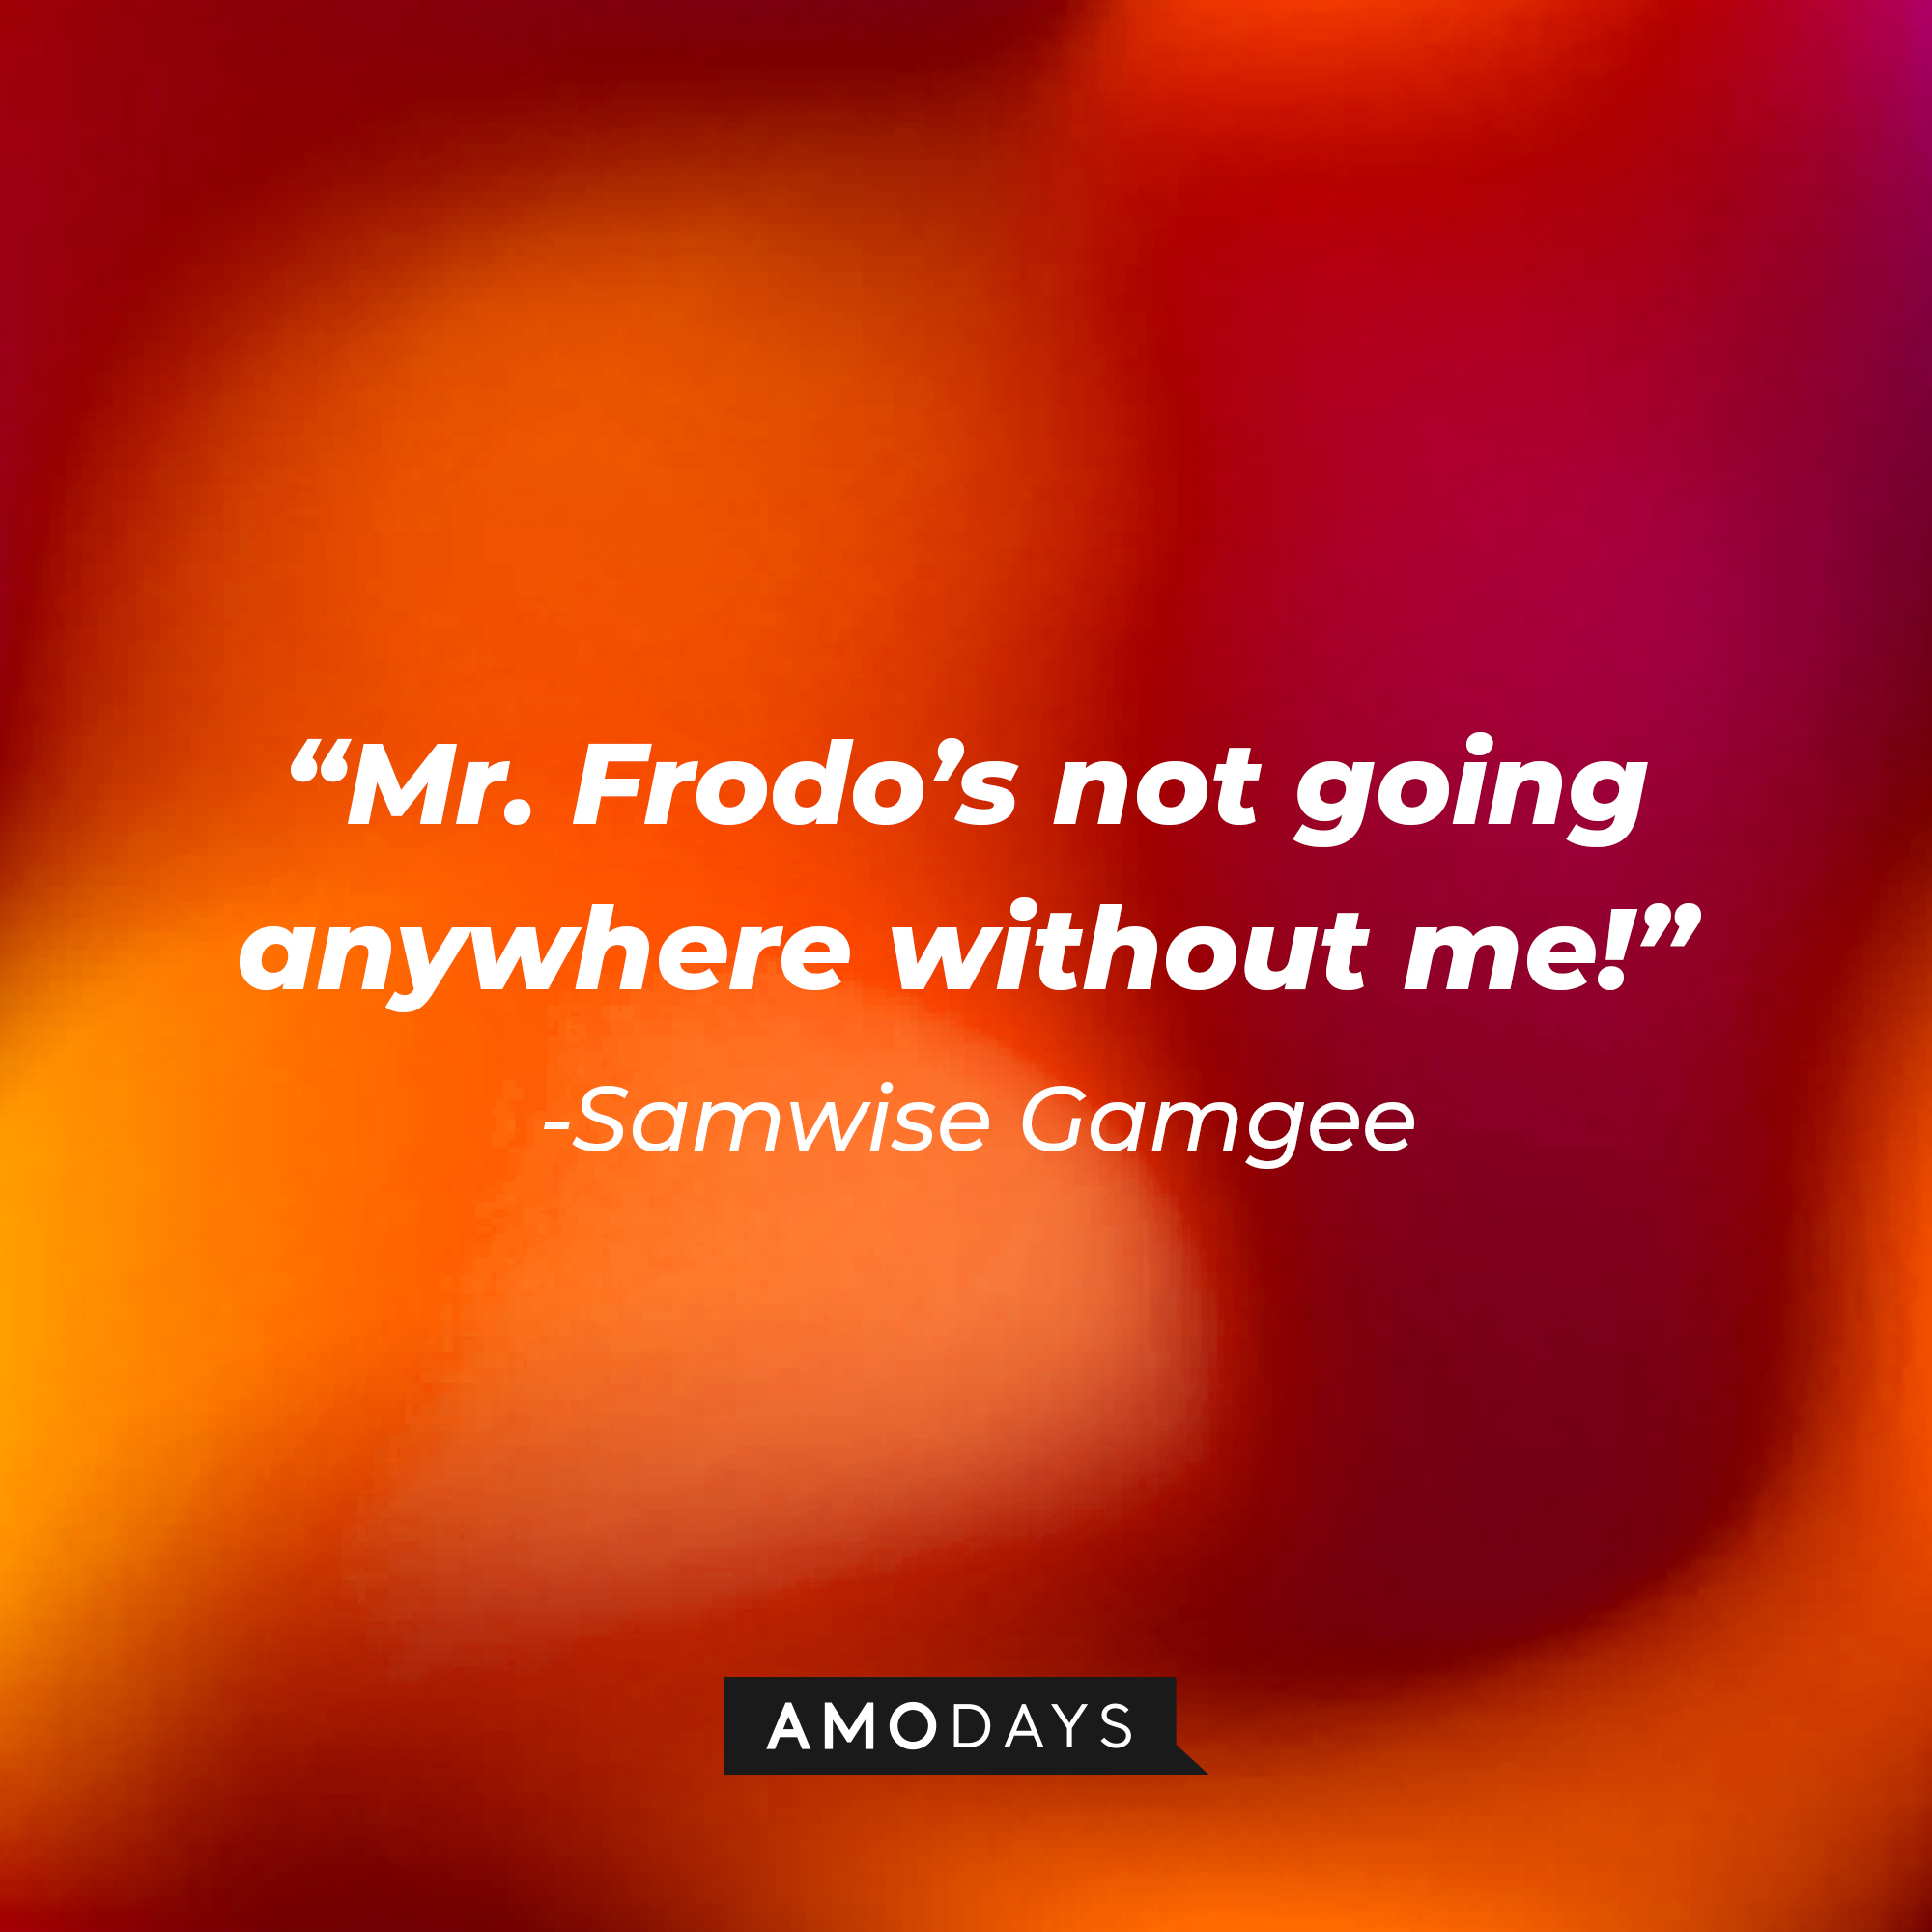 Samwise Gamgee's quote: “Mr. Frodo’s not going anywhere without me!” | Source: Amodays